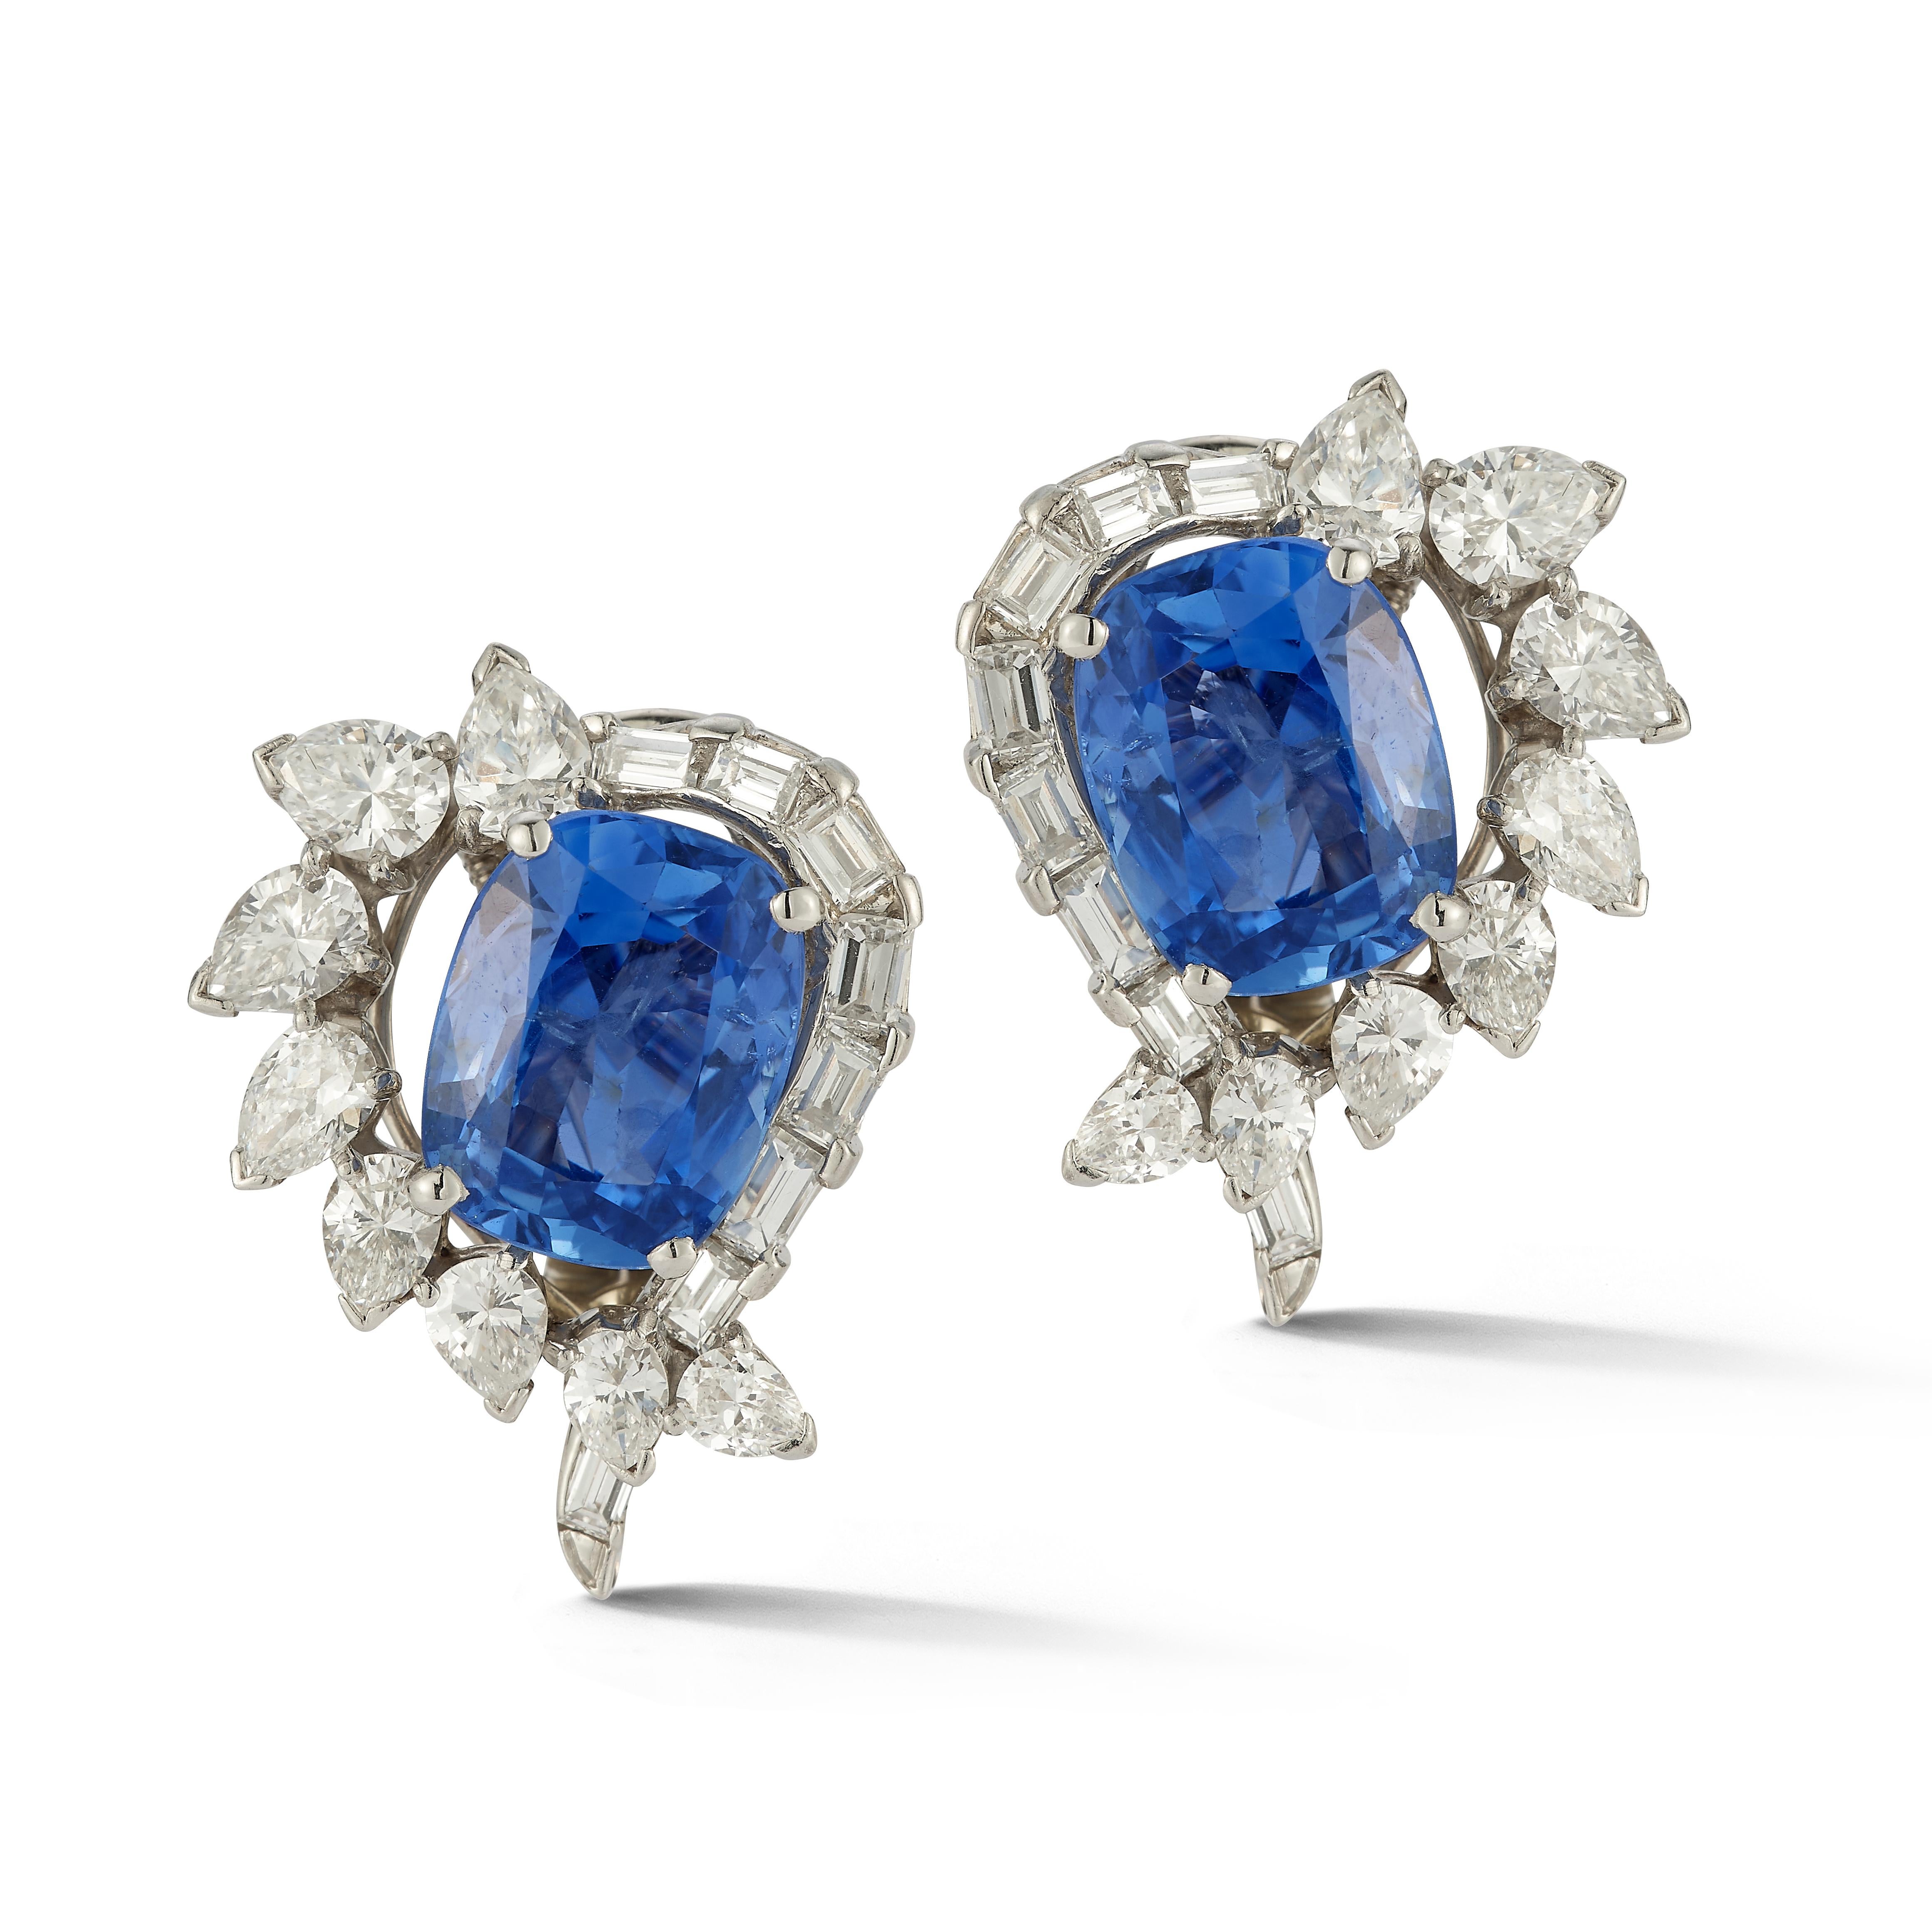 Oscar Heyman Brothers Sapphire and Diamond Earrings 

A beautiful pair of platinum earrings set with GIA-certified natural sapphires and graduating pear and baguette shaped diamonds. 

Accompanied by a GIA report stating the Sapphires are of Sri